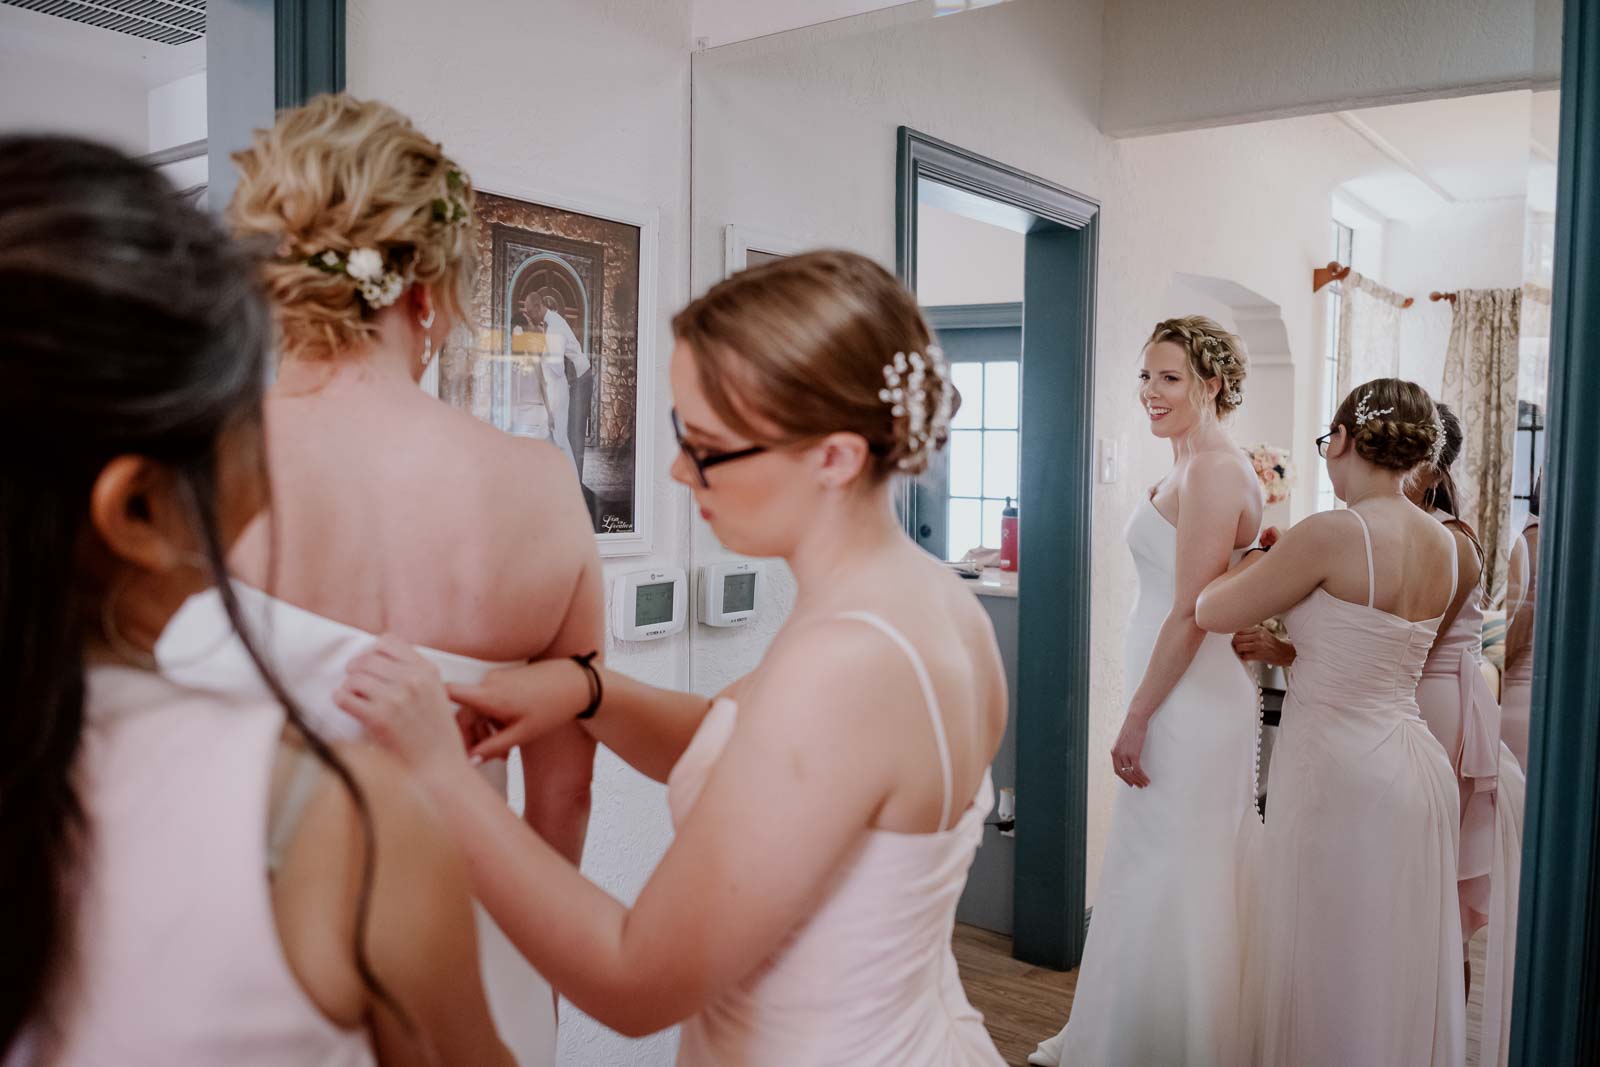 As the bride dresses on her wedding day her daughter helps tie the back of her dress